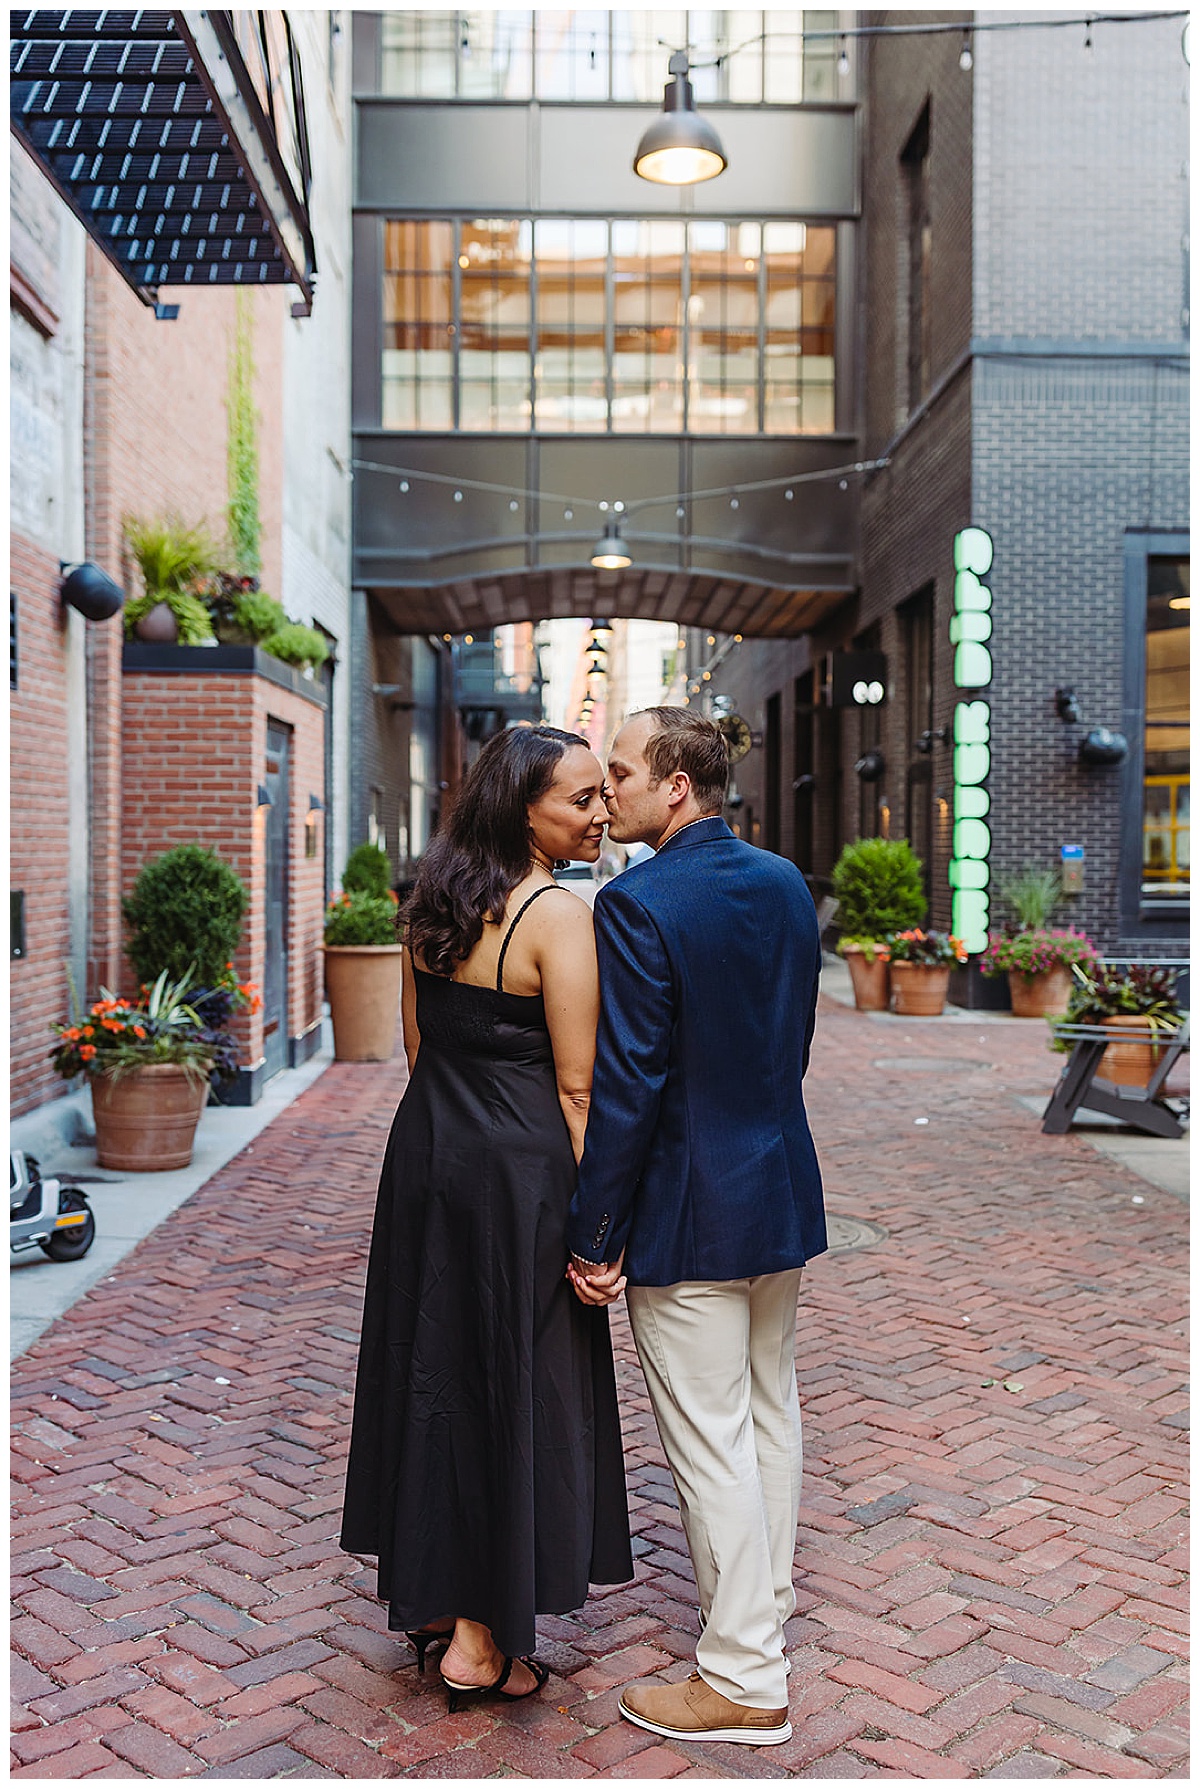 Man kisses woman in front of lights for Detroit Wedding Photographer